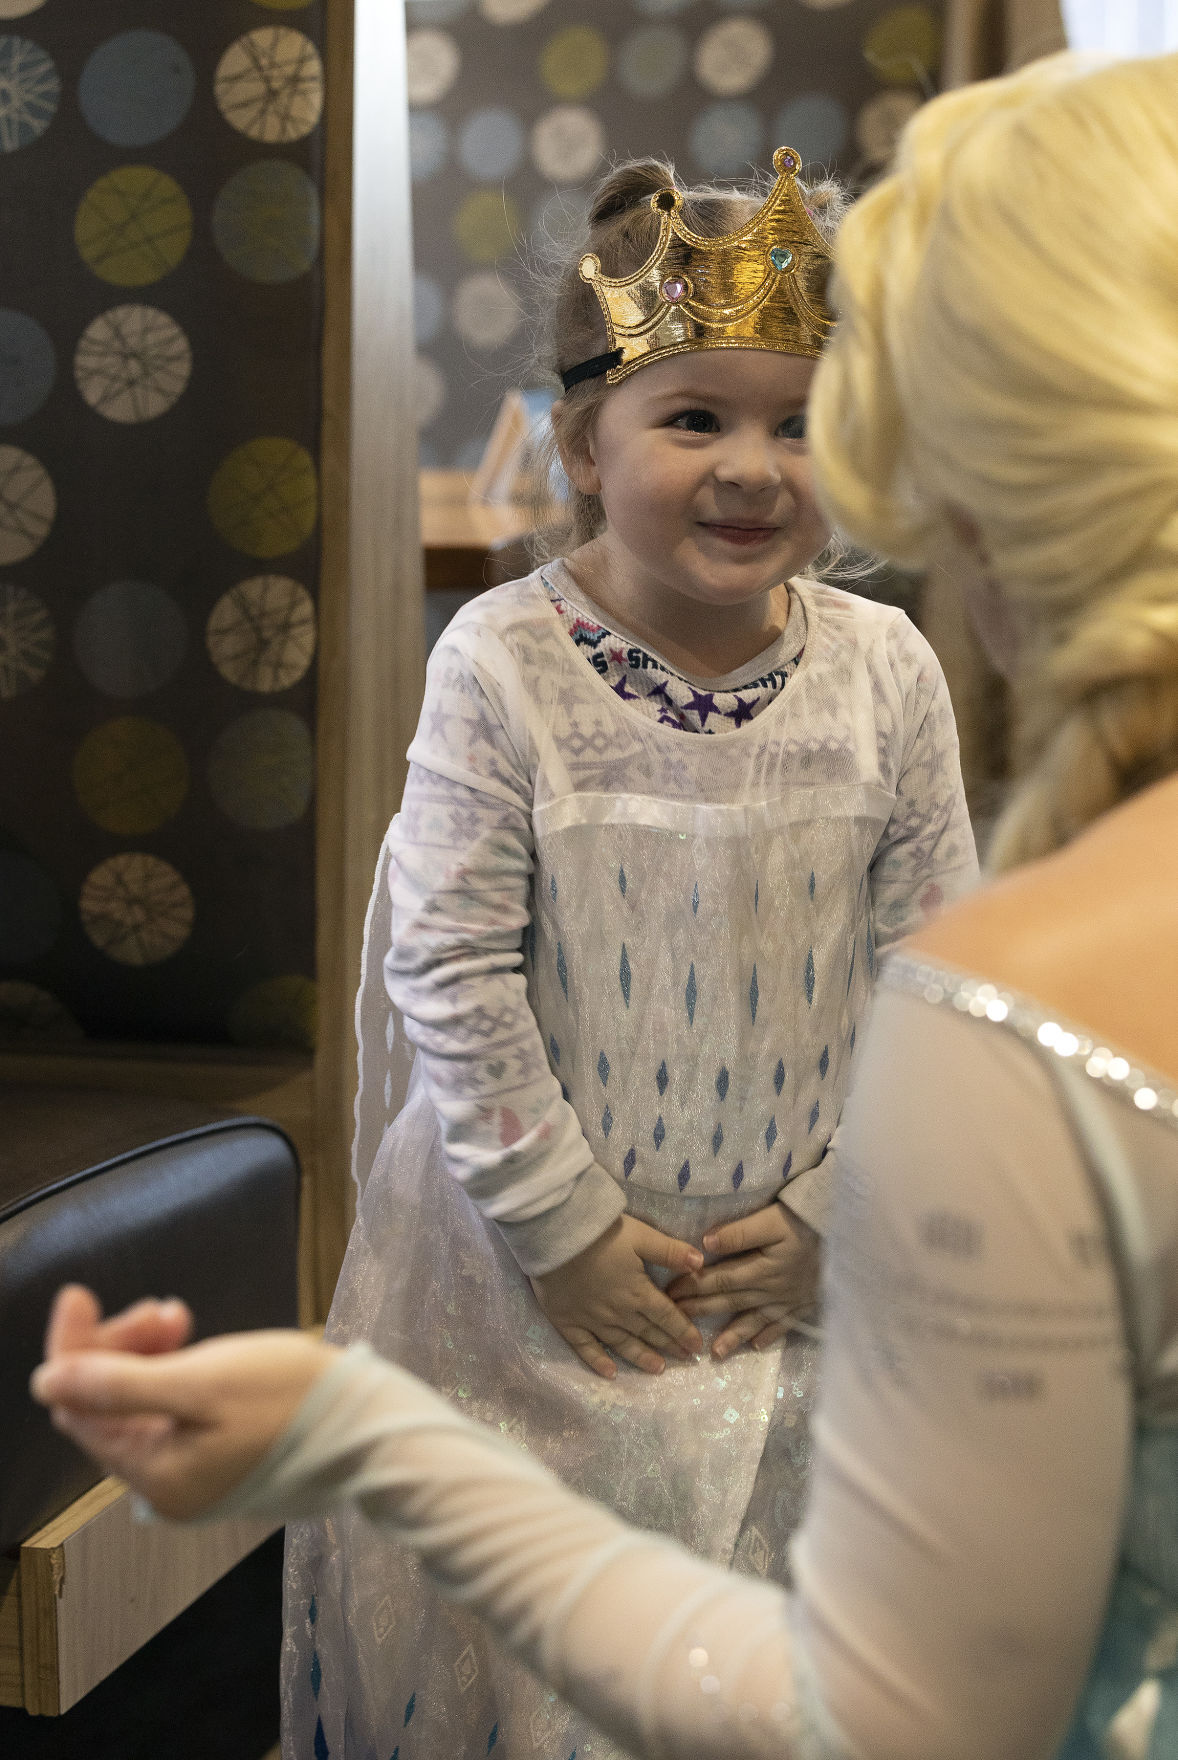 Gentry Fellenzer, 3, of East Dubuque, is excited to meet Traci Yeo, as Elsa, and owner of Royal T Princesses and Superheroes, at Wahlburgers in Hy-Vee on South Locust Street in Dubuque on Friday, March 11, 2022.    PHOTO CREDIT: Stephen Gassman